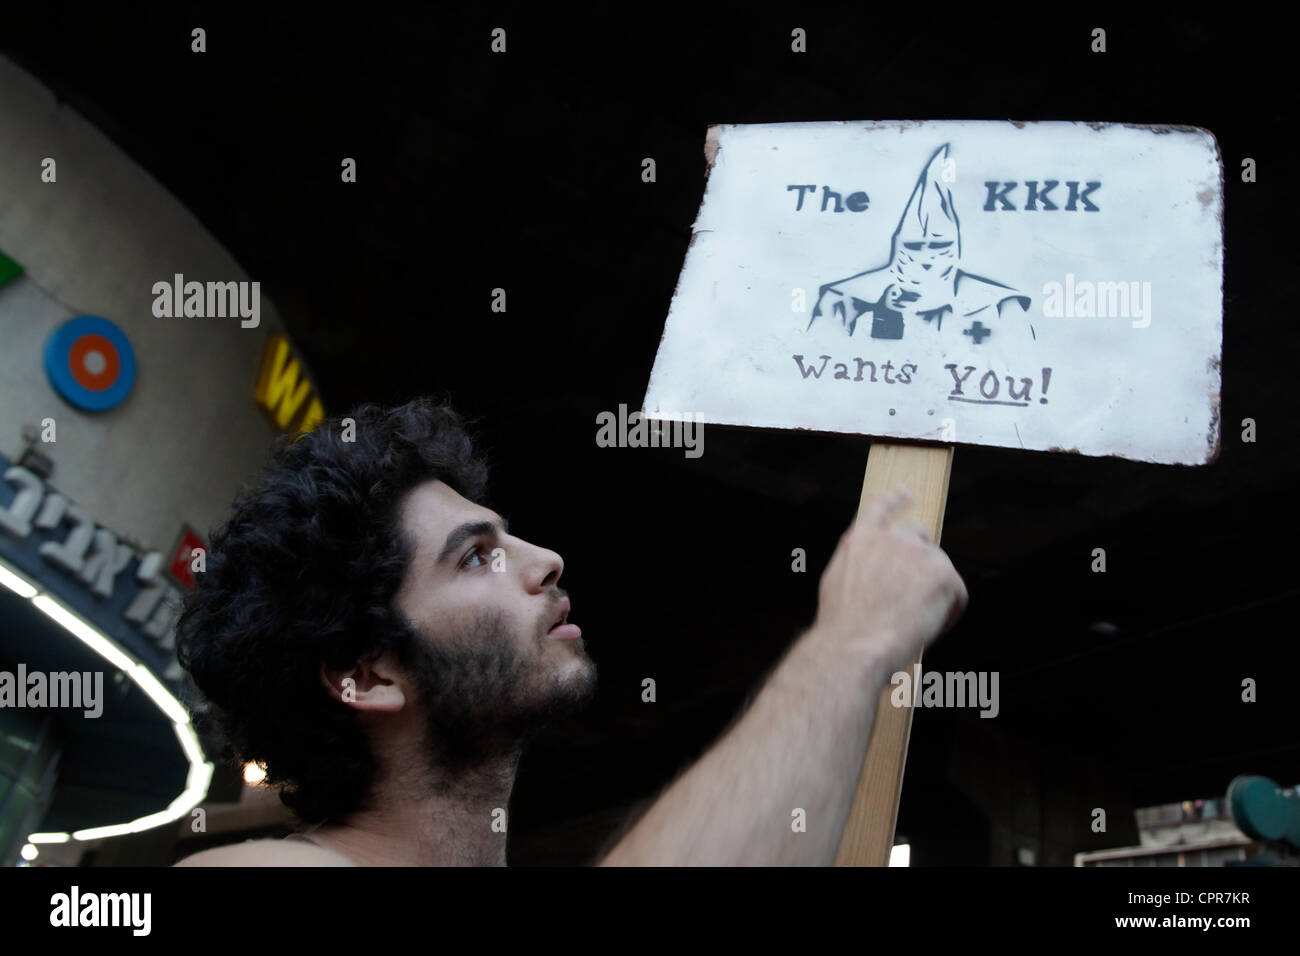 An Israeli Leftist activist holding a placard with the image of a KKK during a counter protest in front of a demonstration organized by Right wing activists against African Migrants in southern Tel Aviv. Israel Stock Photo